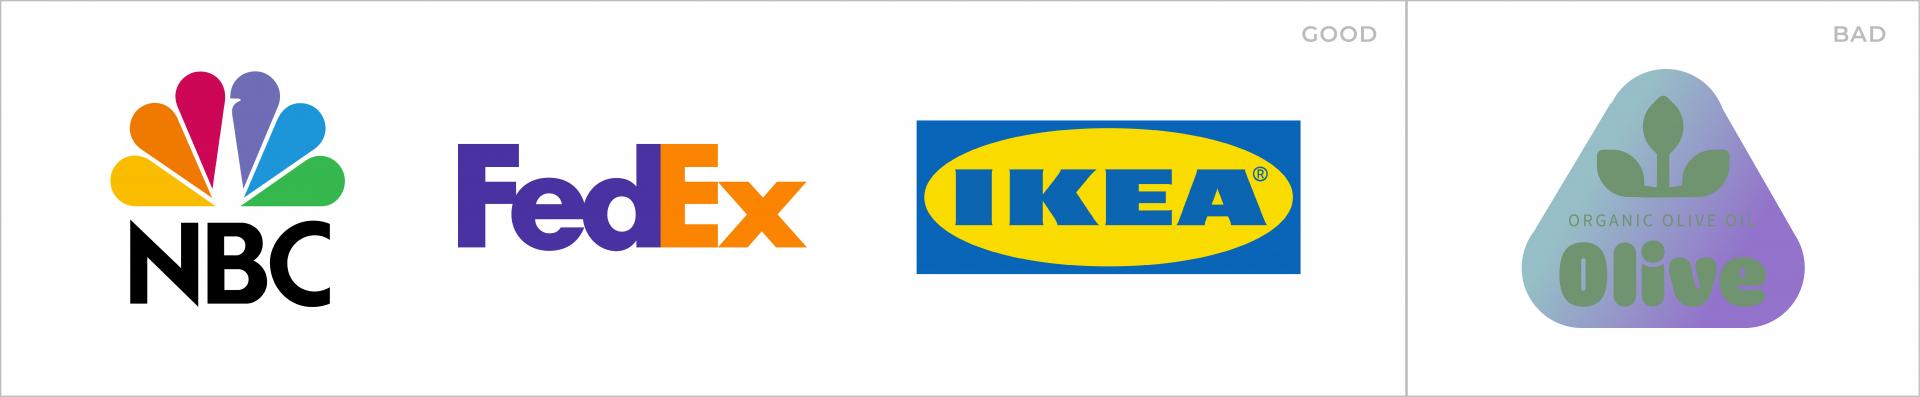 Logo examples demonstrating use of colour